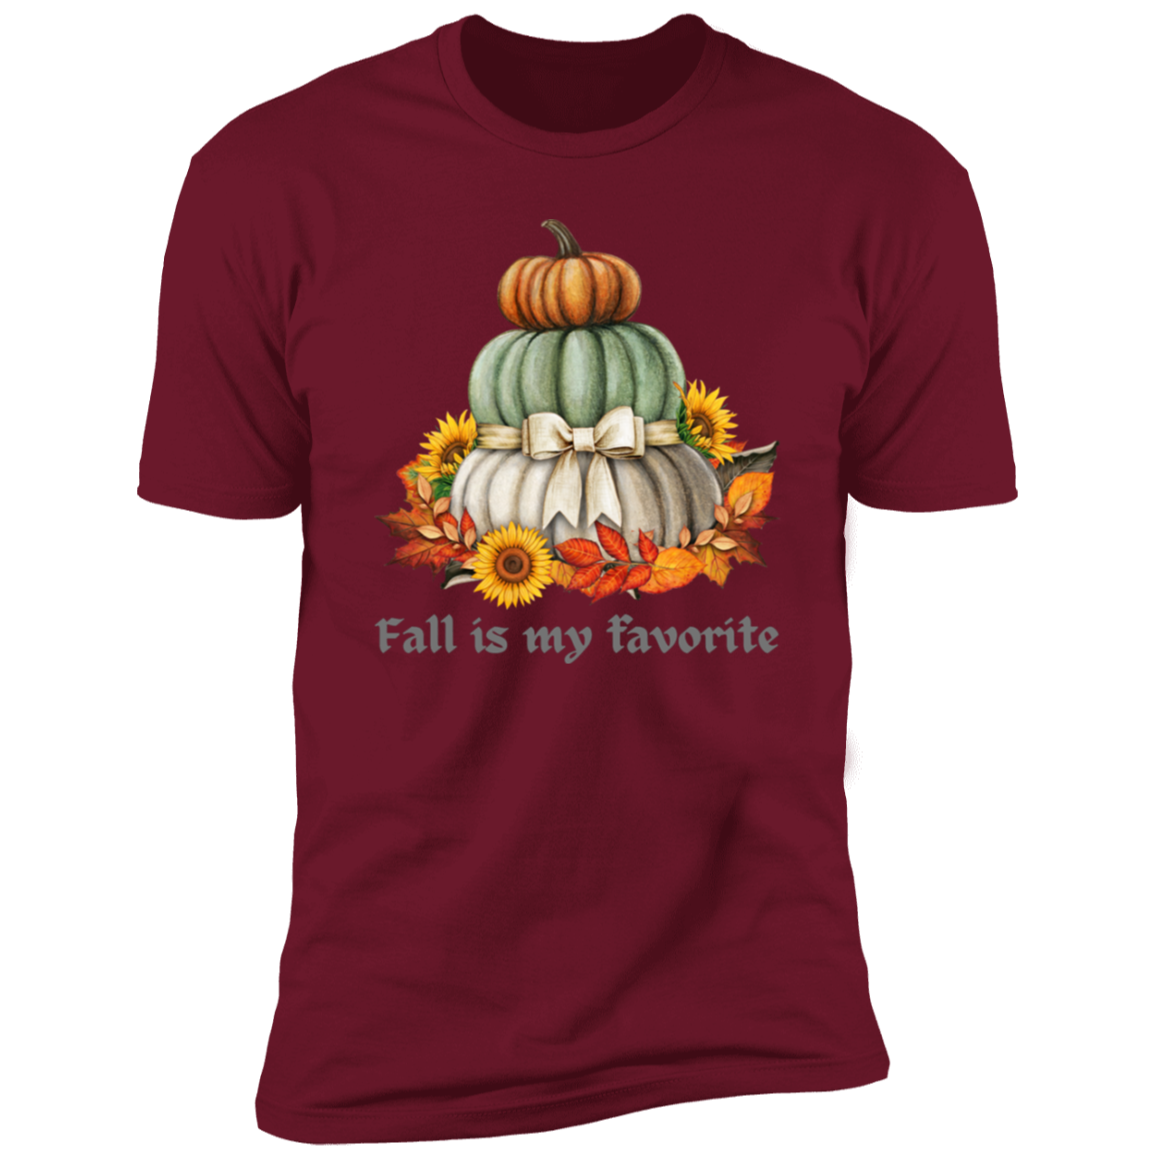 Fall is my favorite Z61x Premium Short Sleeve Tee (Closeout)